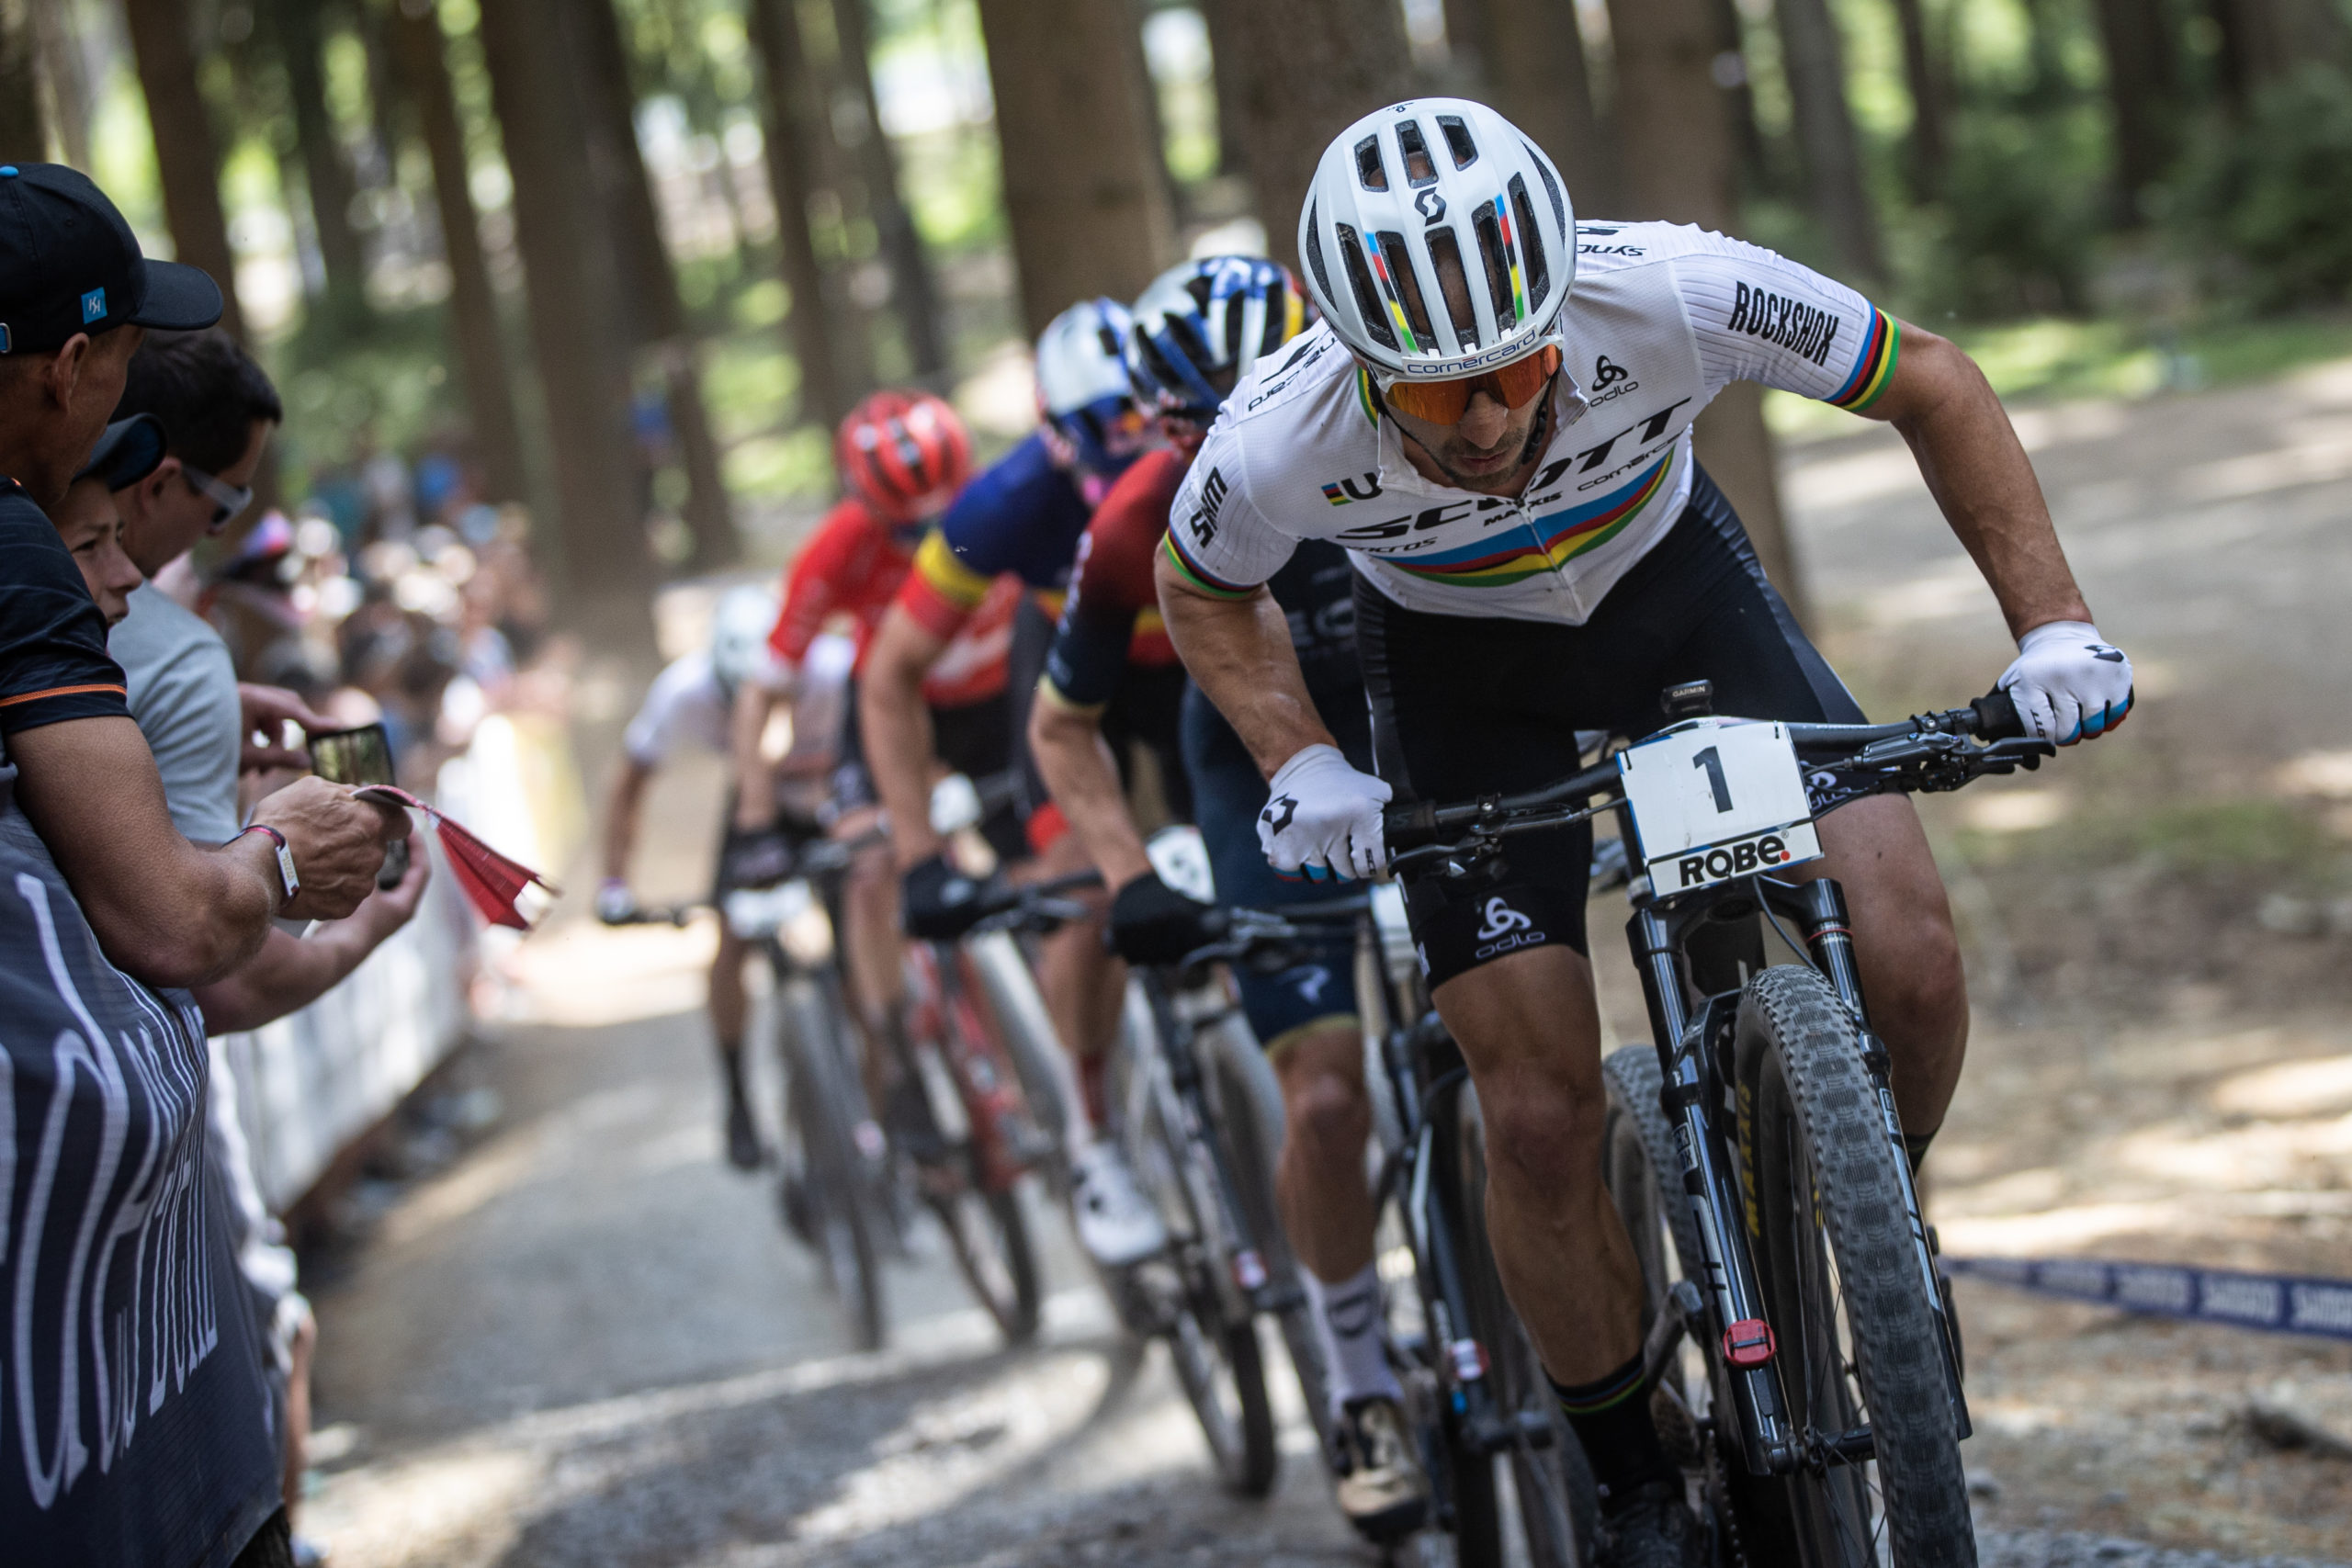 Nino Schurter leading a pack of riders in Nove Mesto